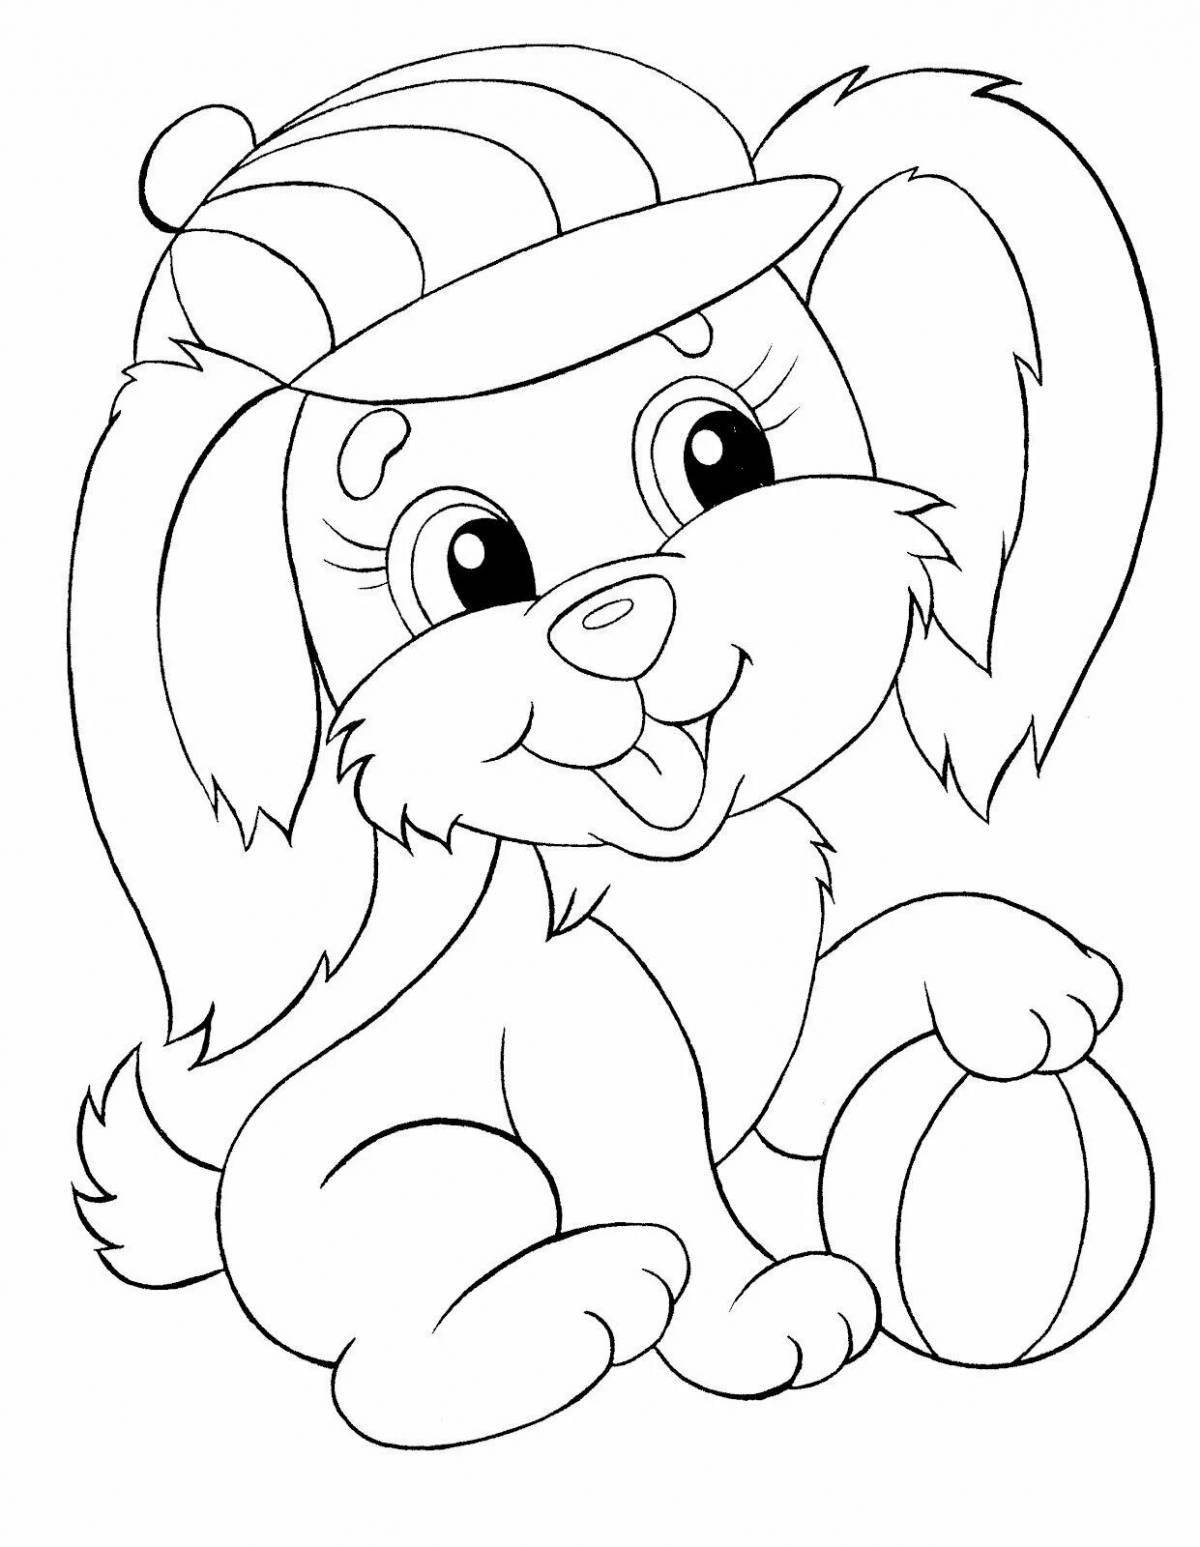 Fun animal coloring pages for 5-6 year olds